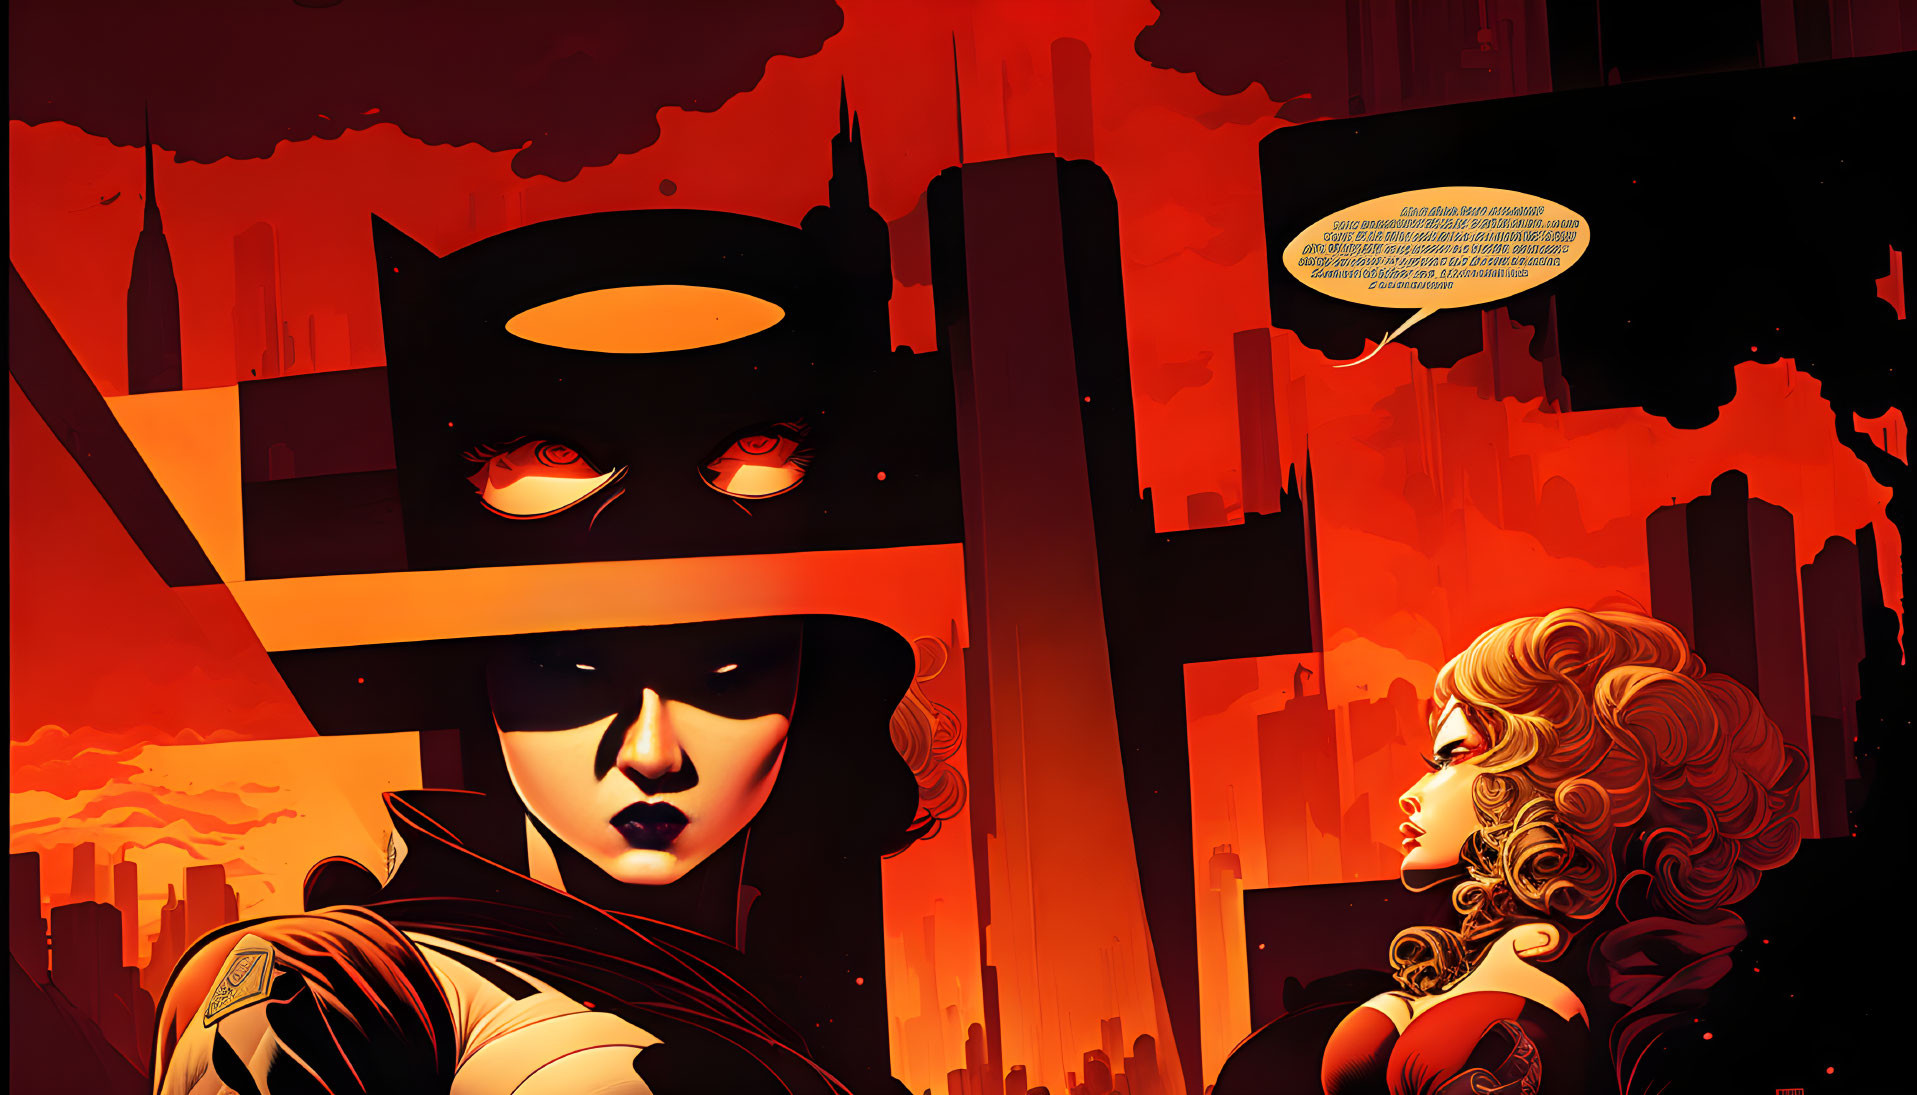 Comic book illustration: superhero character with mask and cape, alongside a blonde character, set in a red